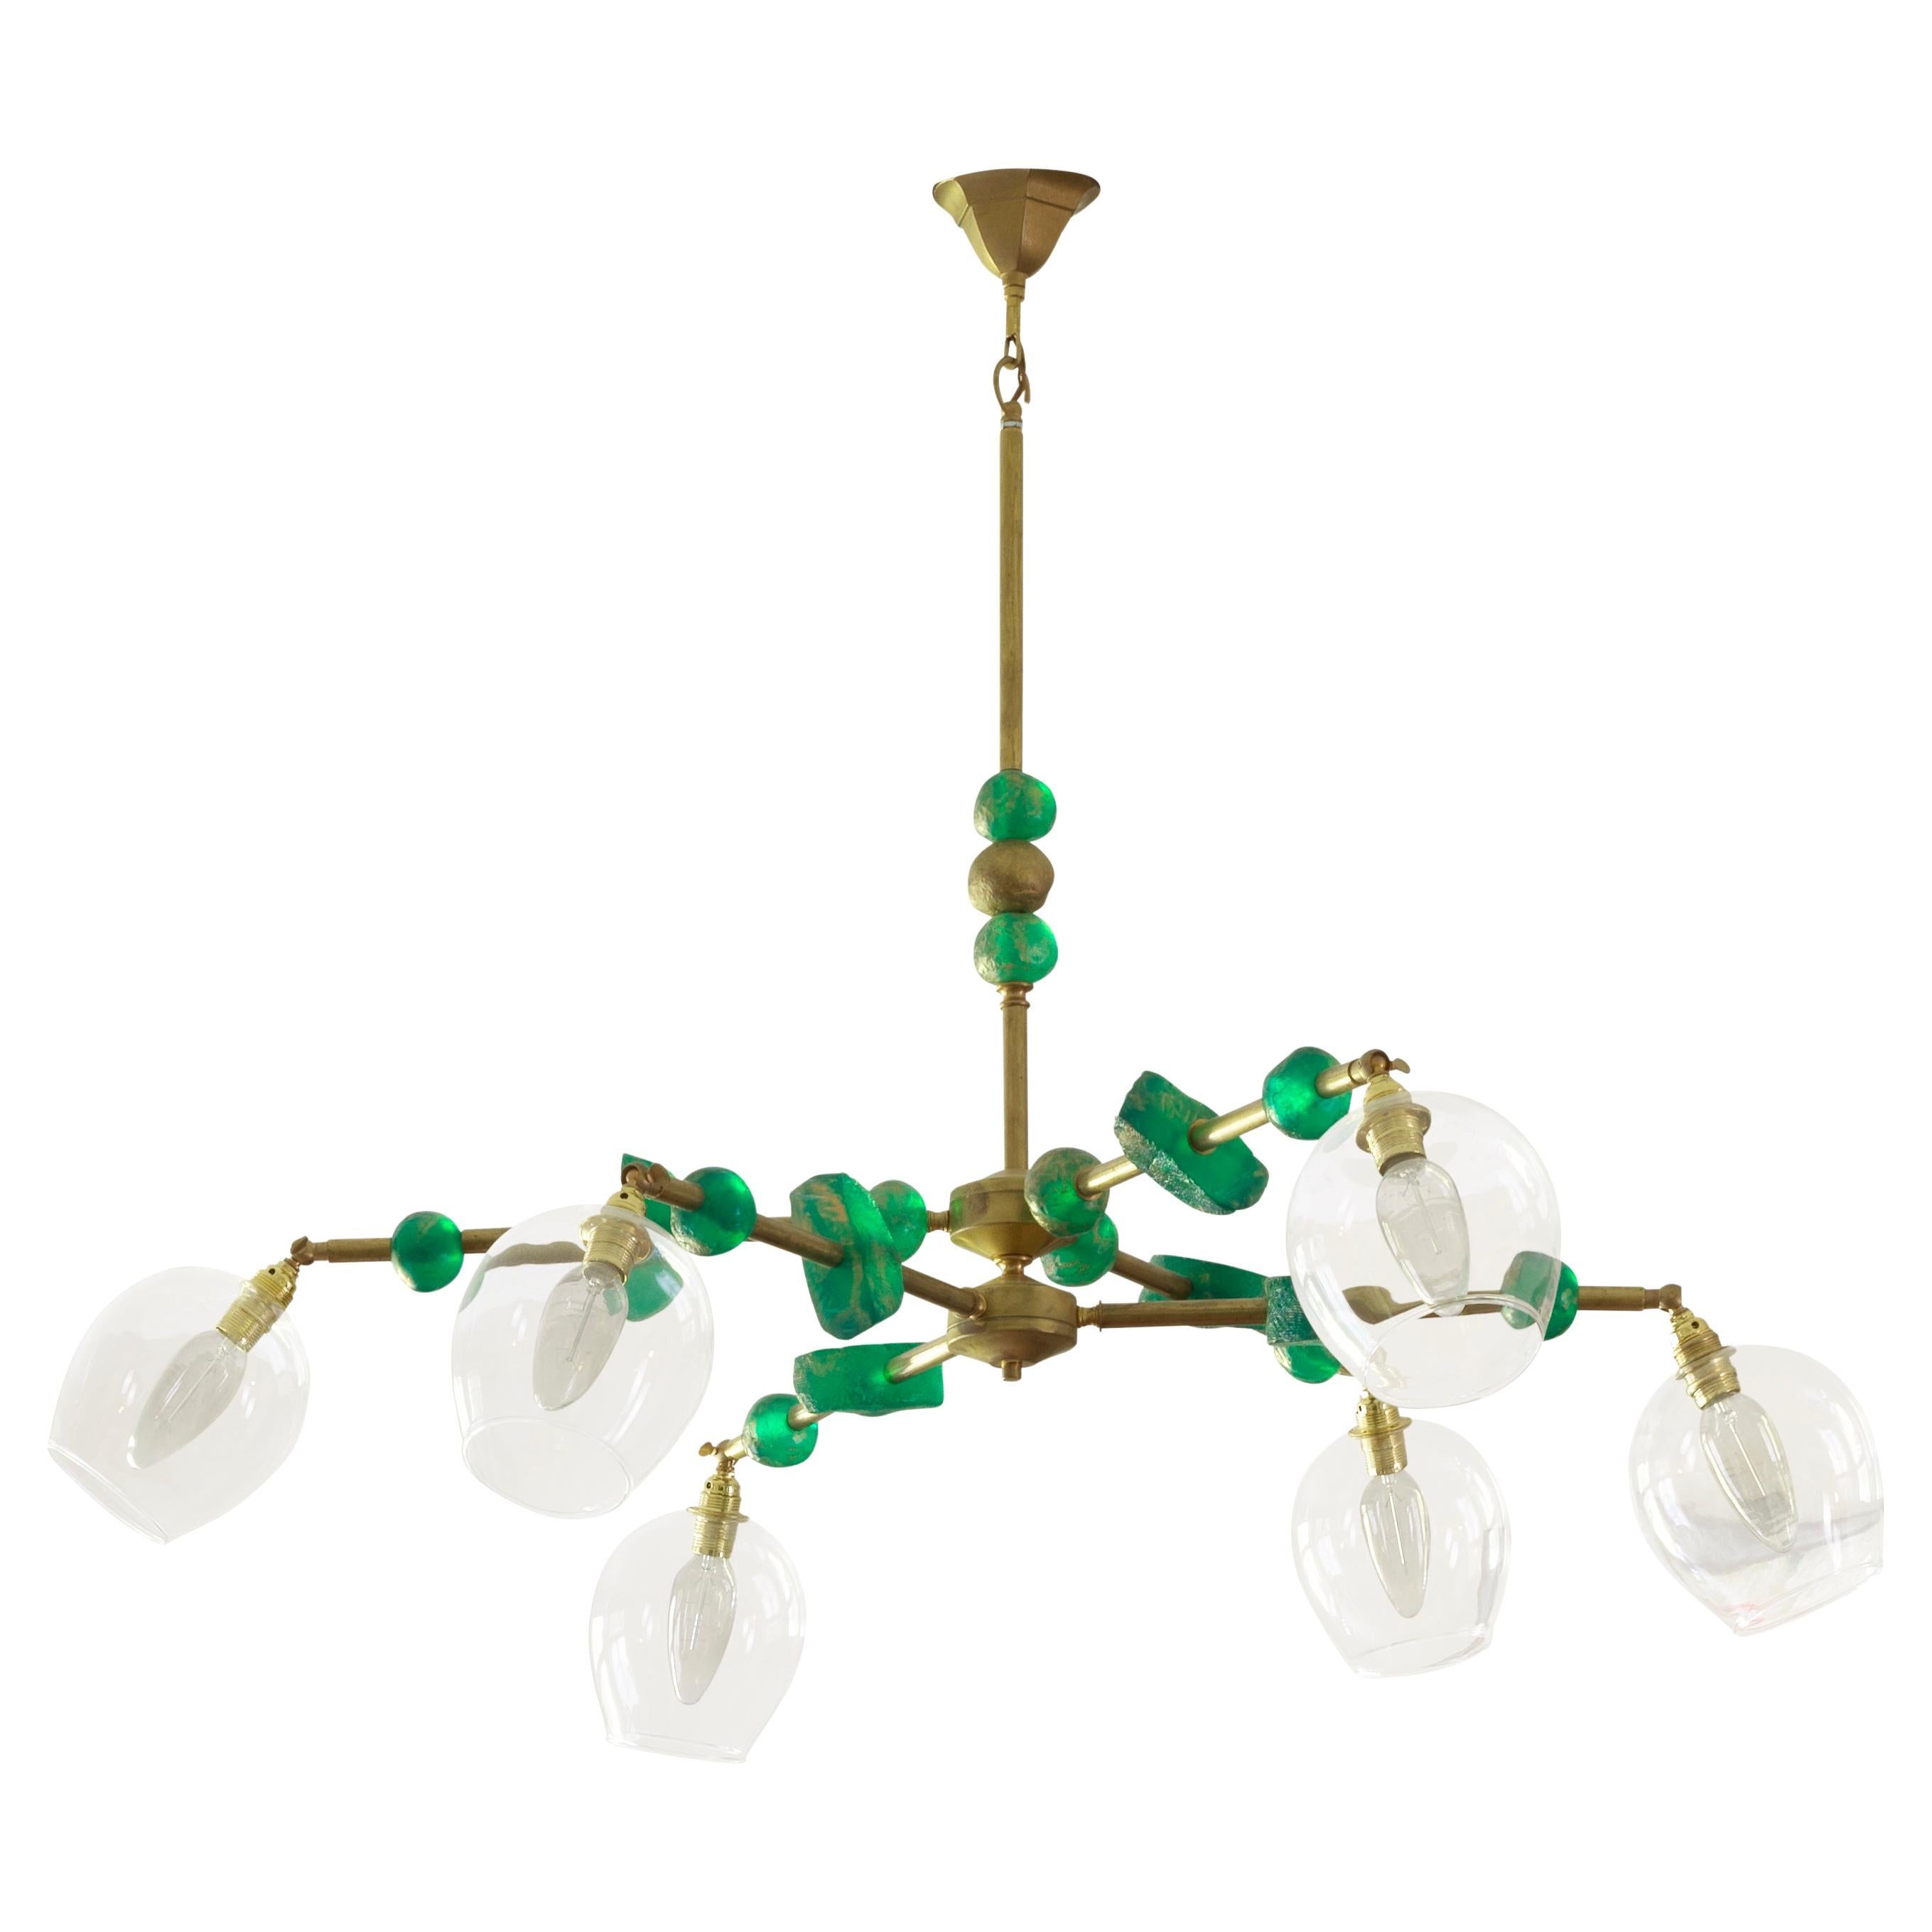 Emerald Contemporary Chandelier, Brass with Sculpted Spheres by Margit Wittig